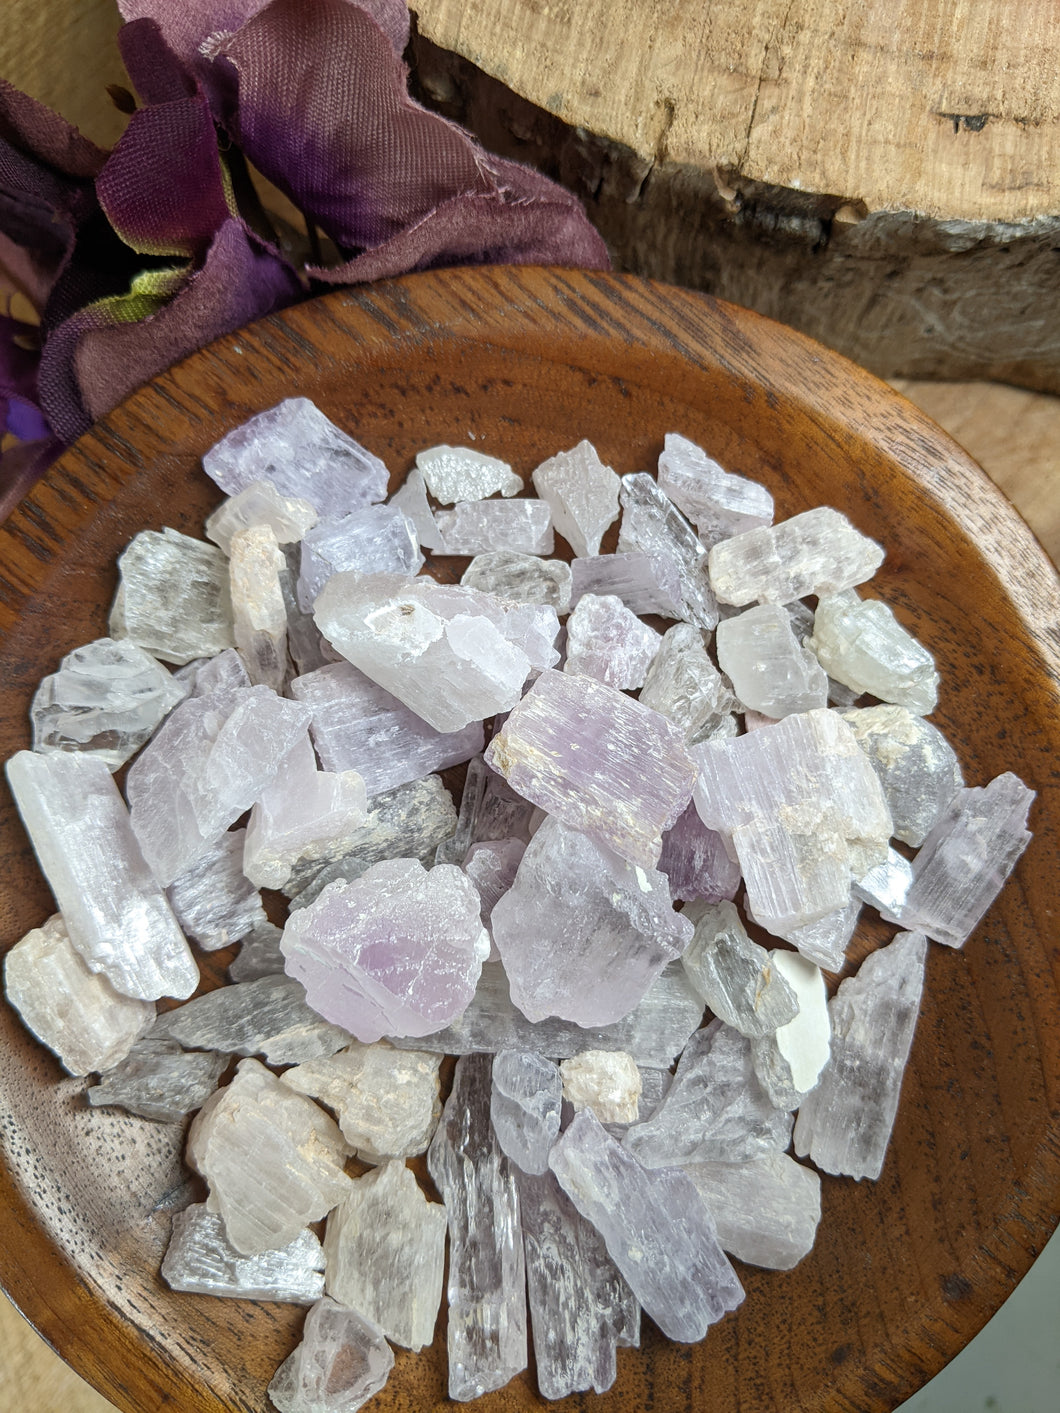 Mixed pieces of raw kunzite in a wooden bowl, next to a purple silk flower and part of a tree stump.